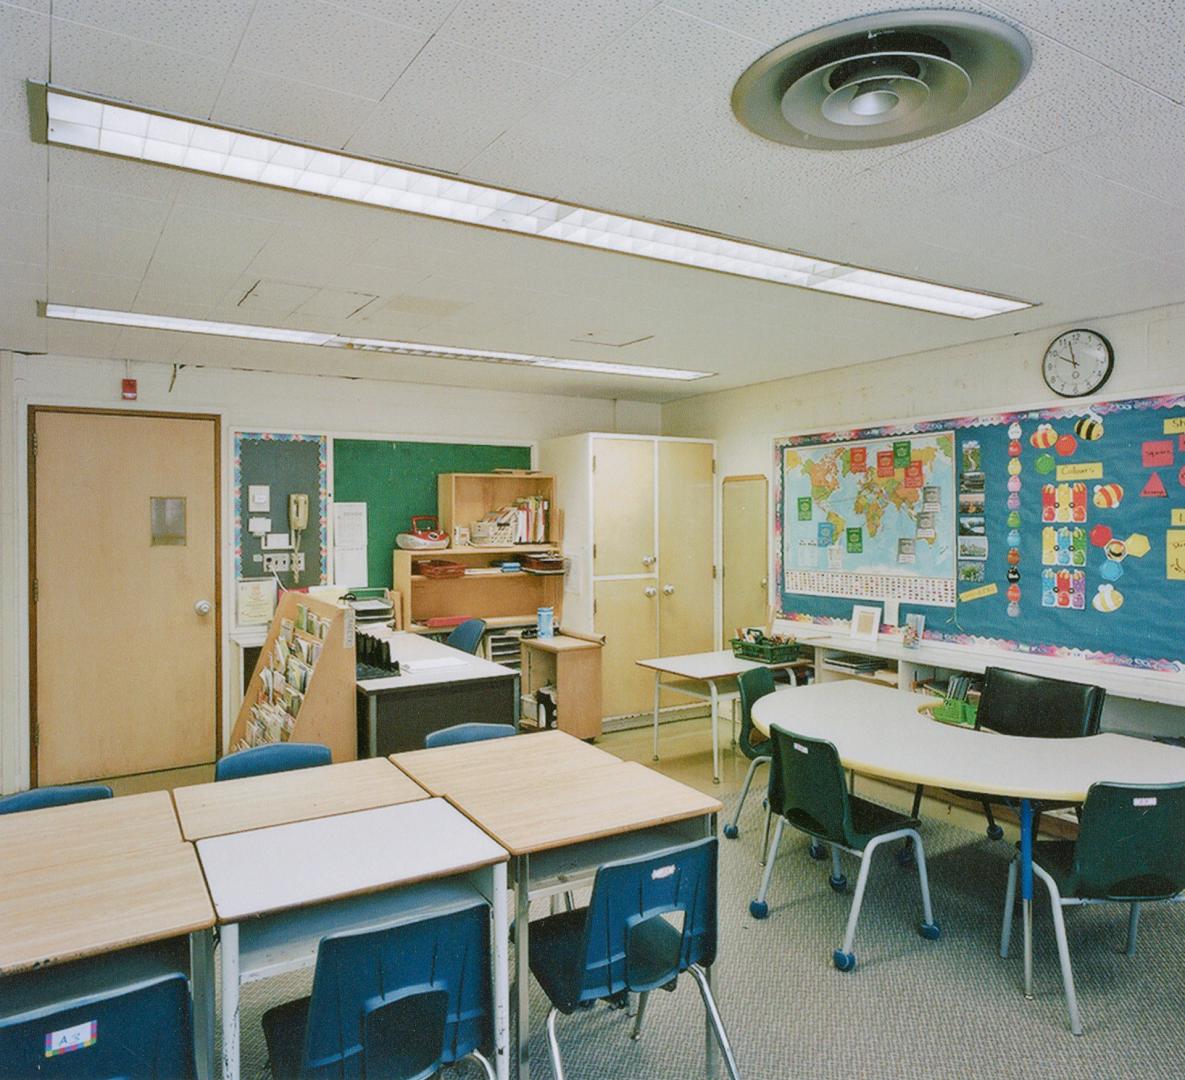 A photograph of a public school classroom, with chairs, tables, a chalkboard, shelves and cabin ...